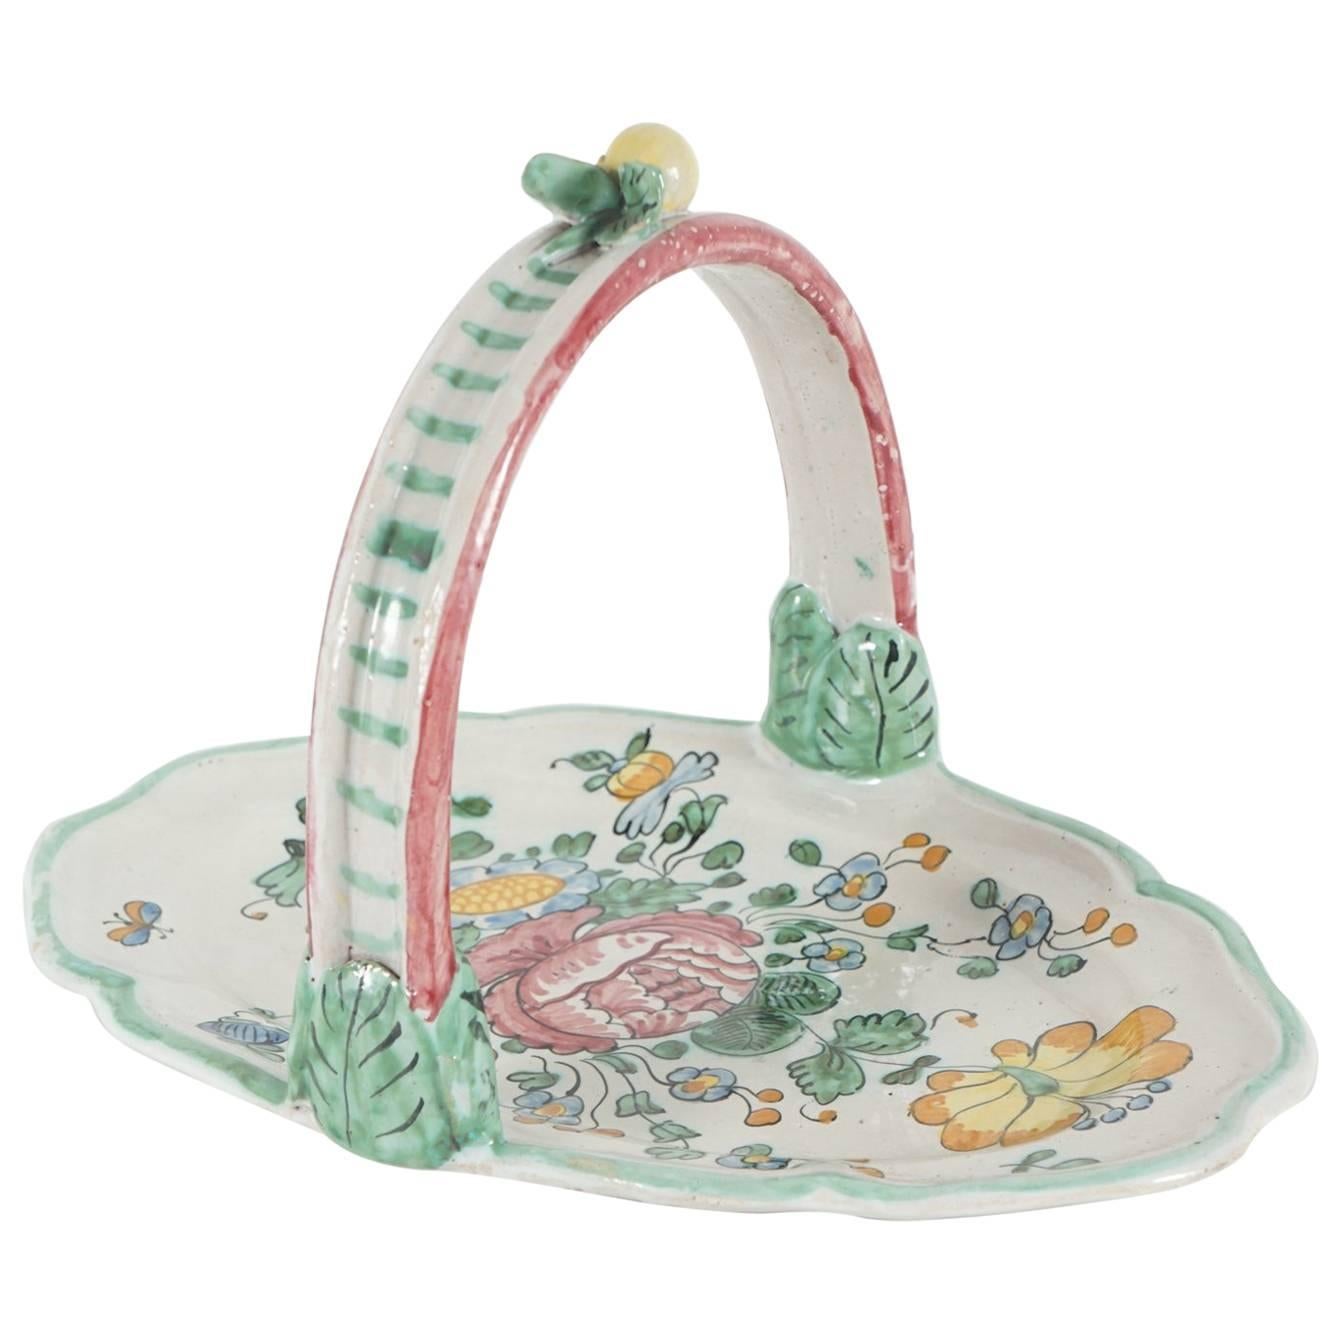 Italian Pottery Tray with Floral Decoration from the Estate of Bunny Mellon